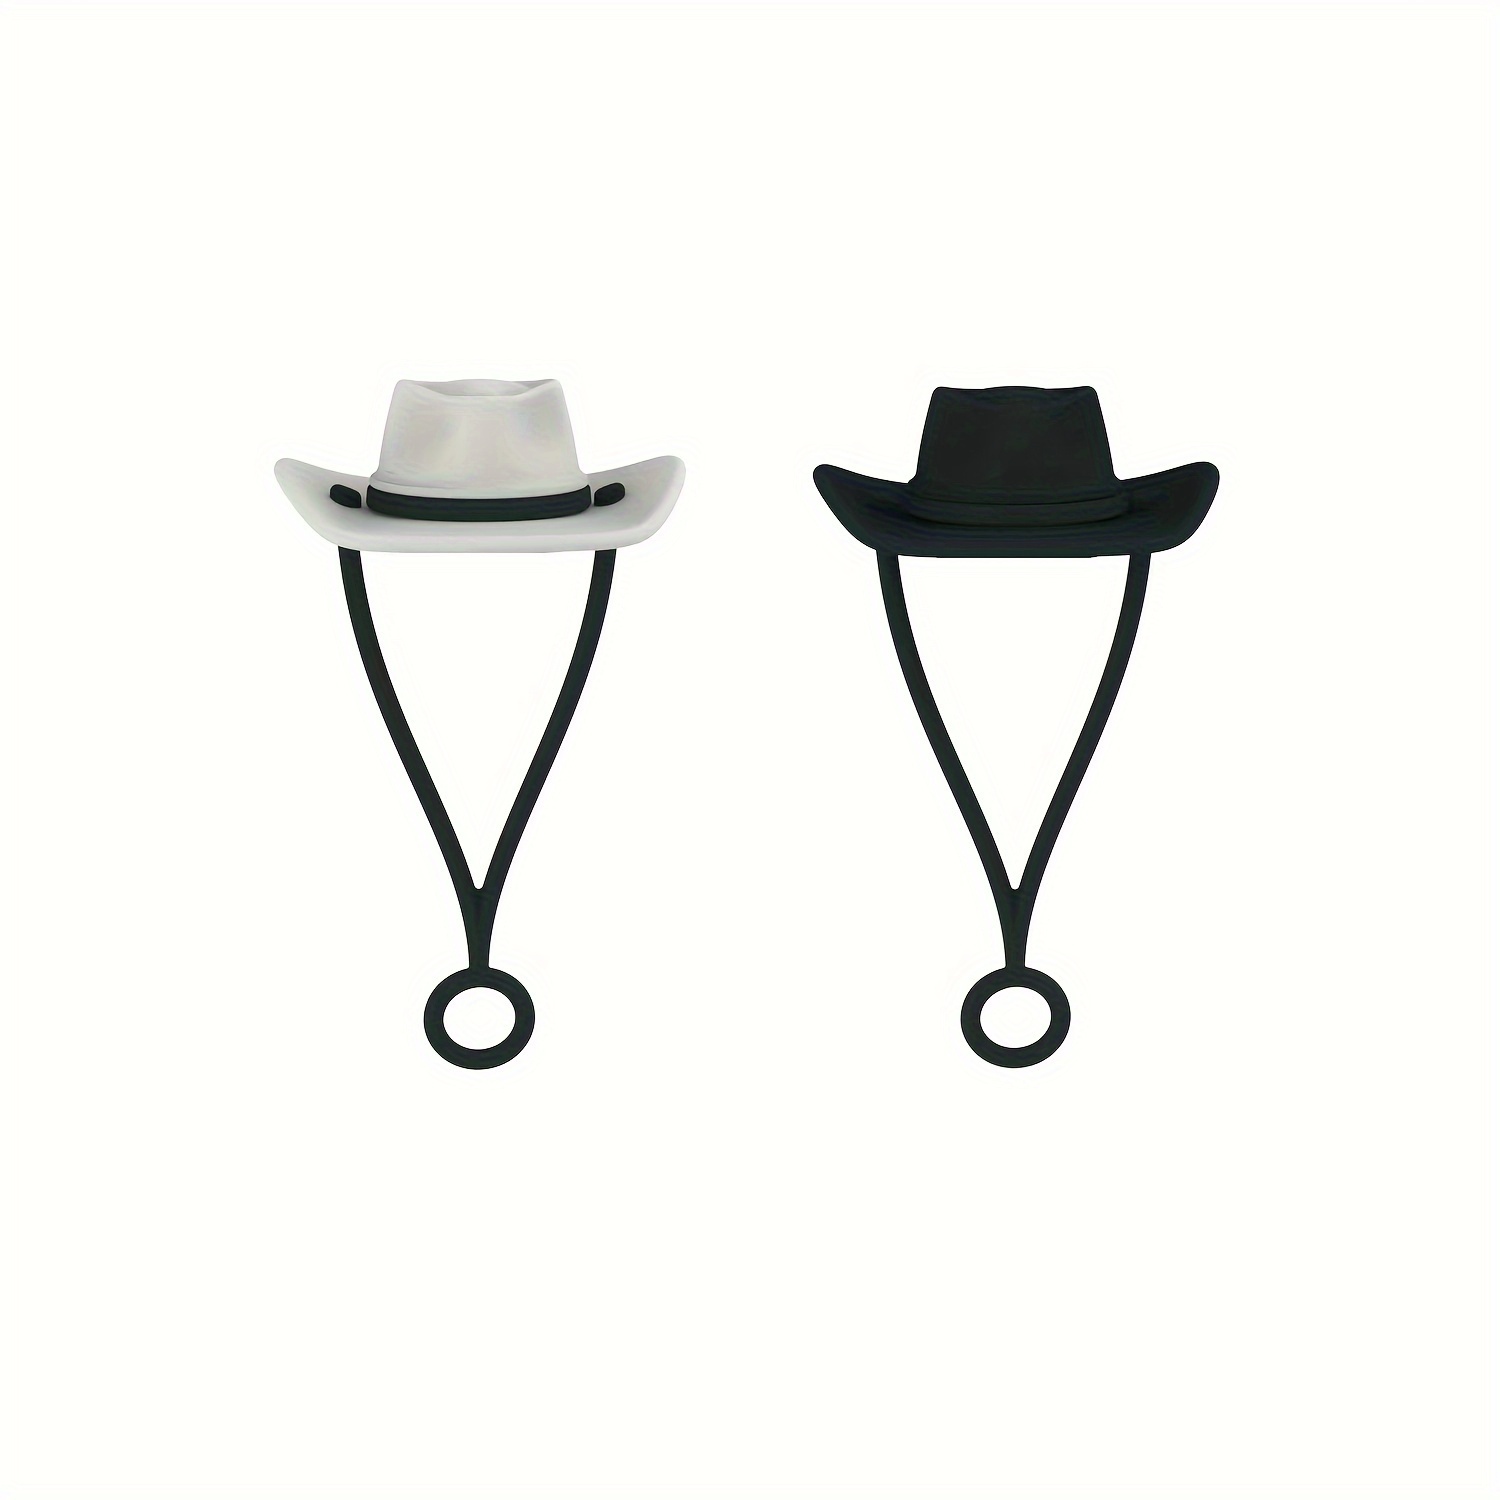 Silicone Cowboy Hat Straw Covers for Stanley Cup, 6-10mm Silicone